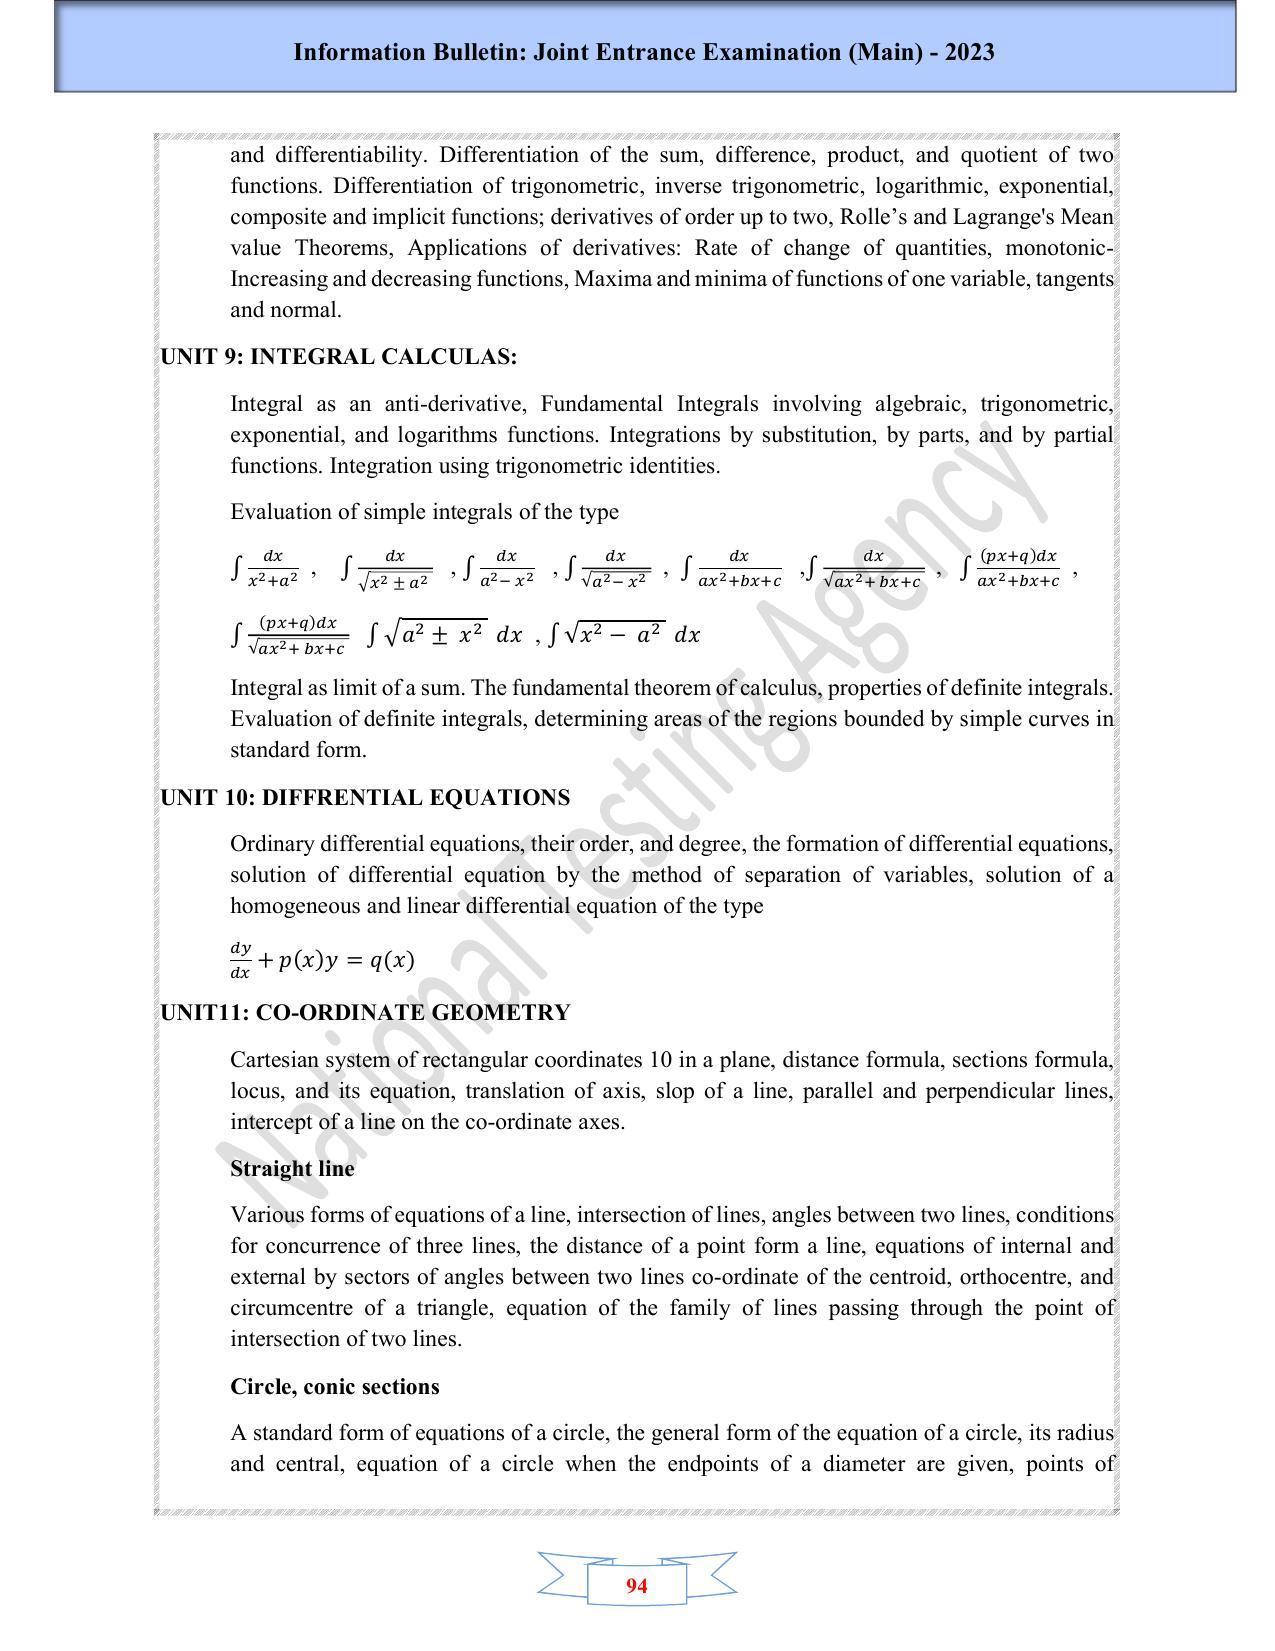 JEE Main 2023 Session 2 - Page 96